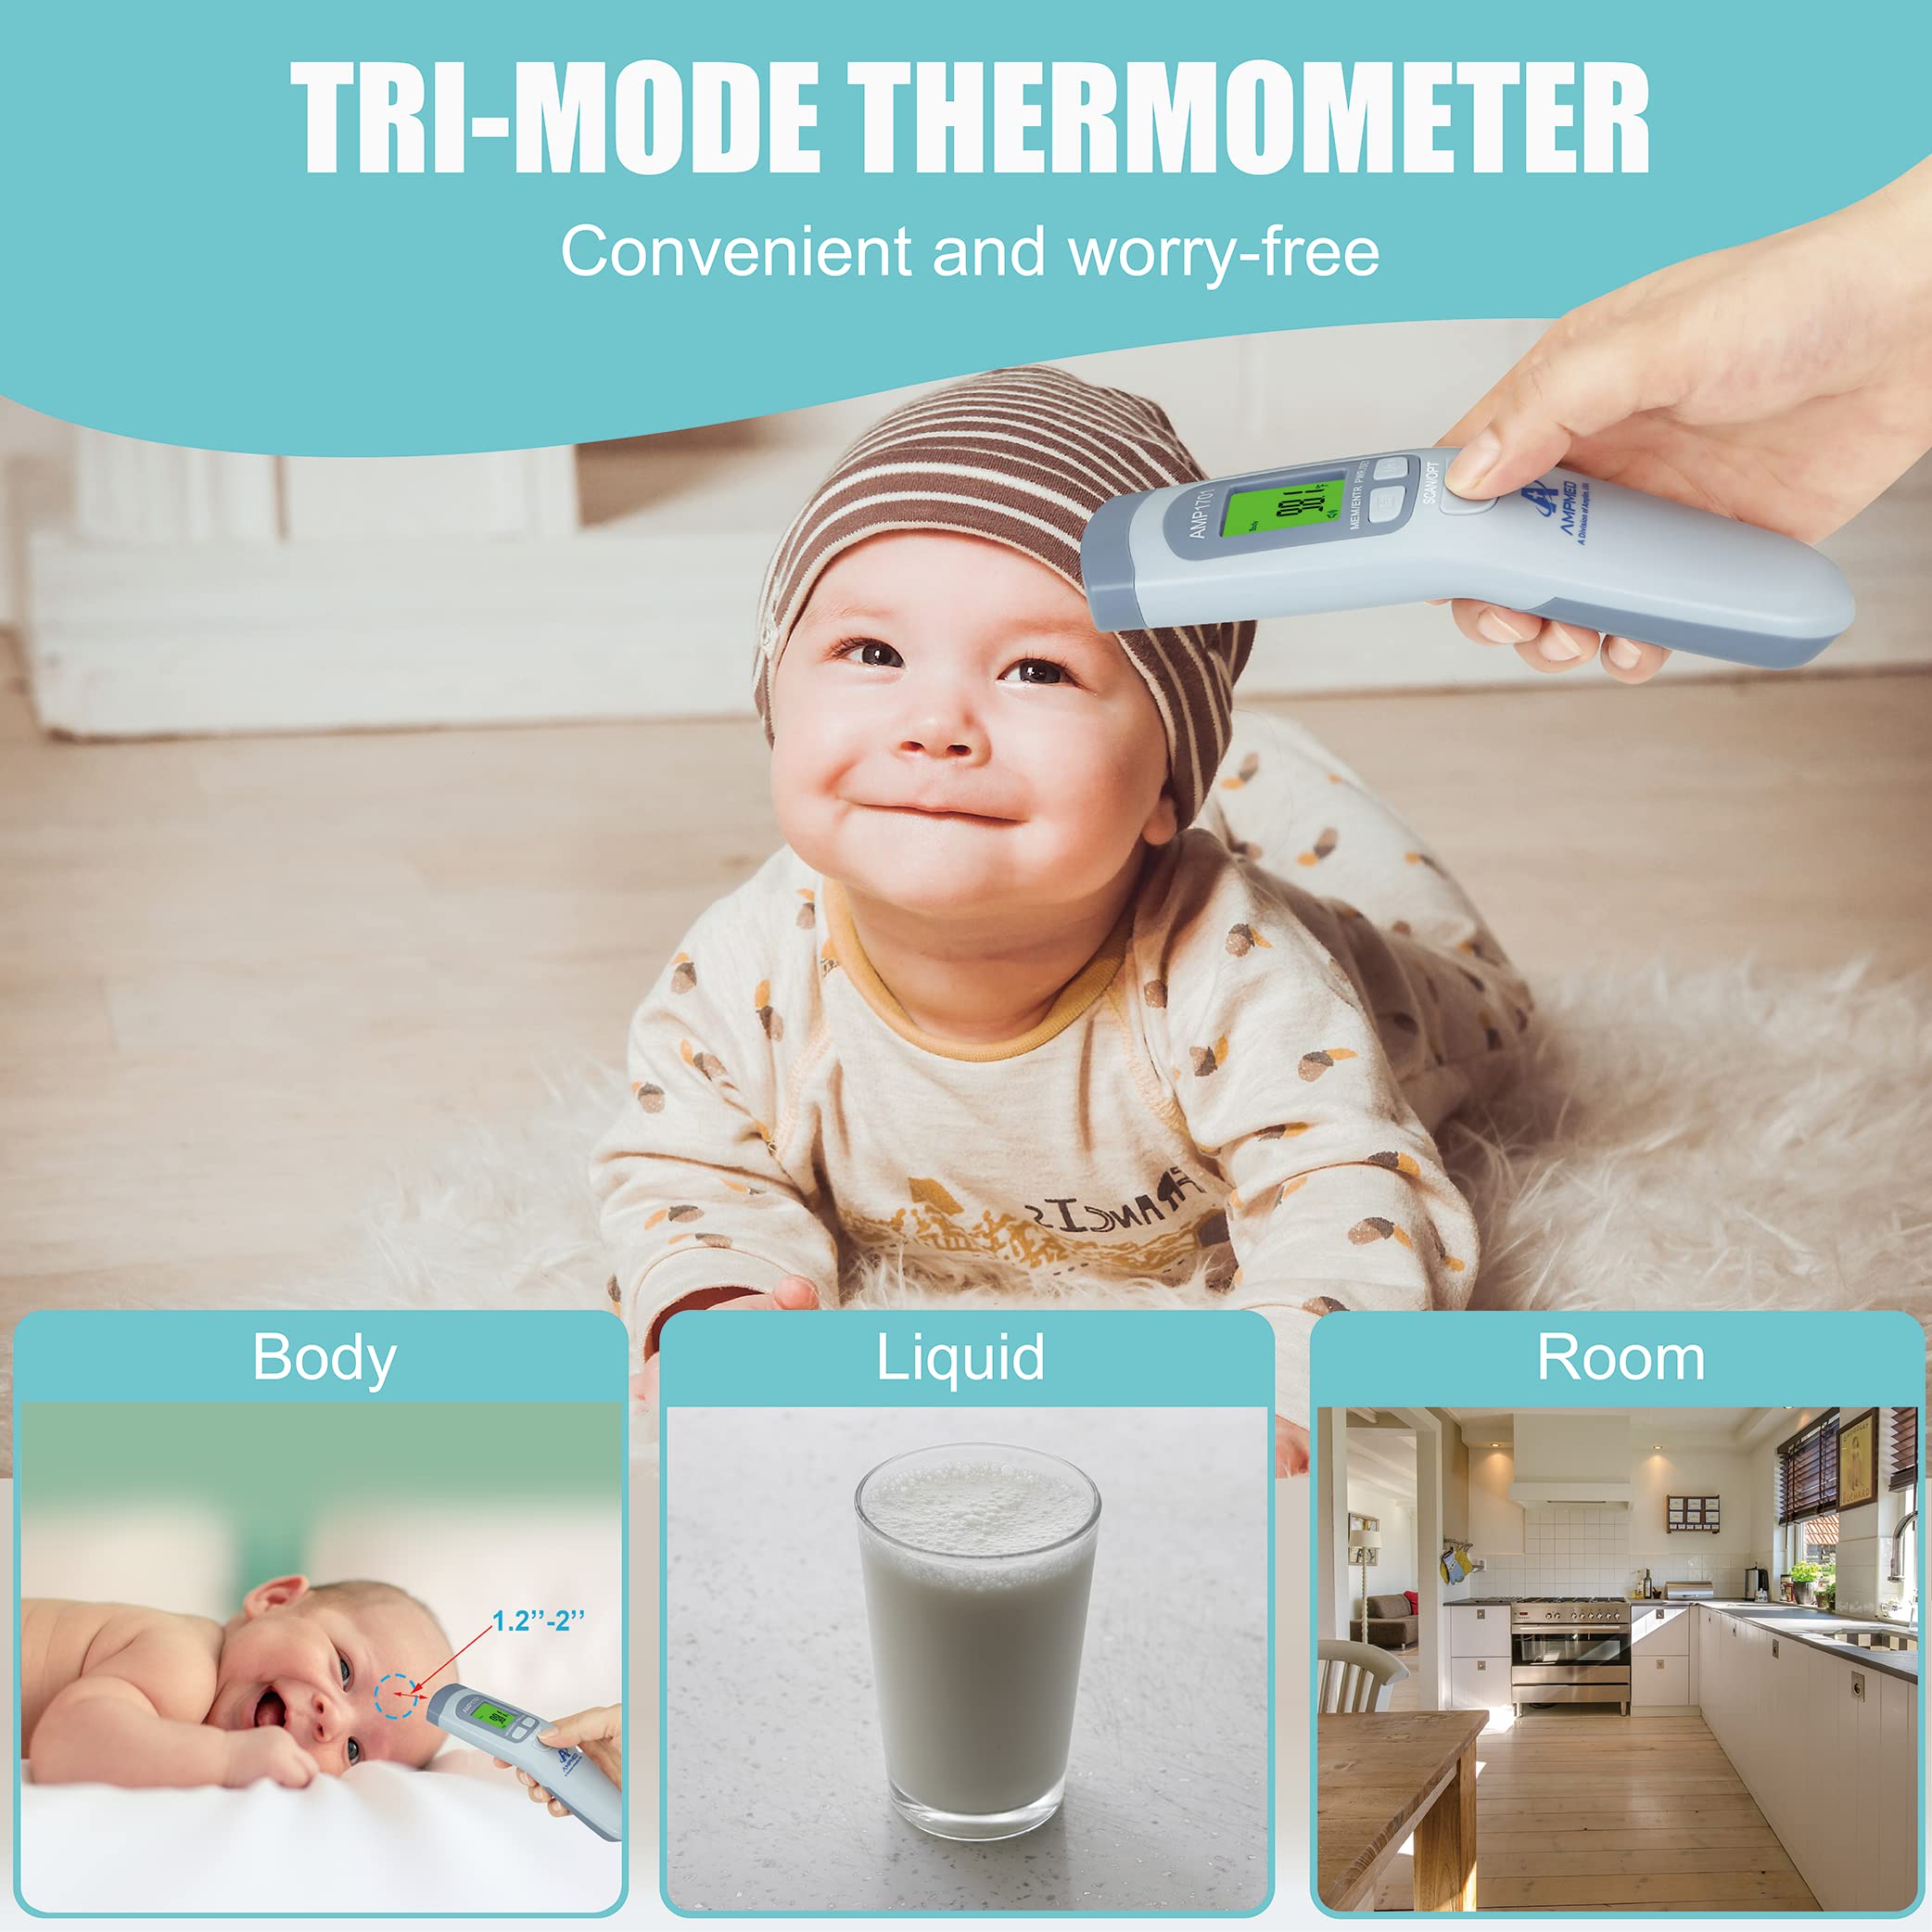 Amplim Non Contact/No Touch Forehead Thermometer for Adults, Kids, and Babies, Accurate Hospital Medical Grade Touchless Temporal Thermometer FSA HSA Approved, Serenity